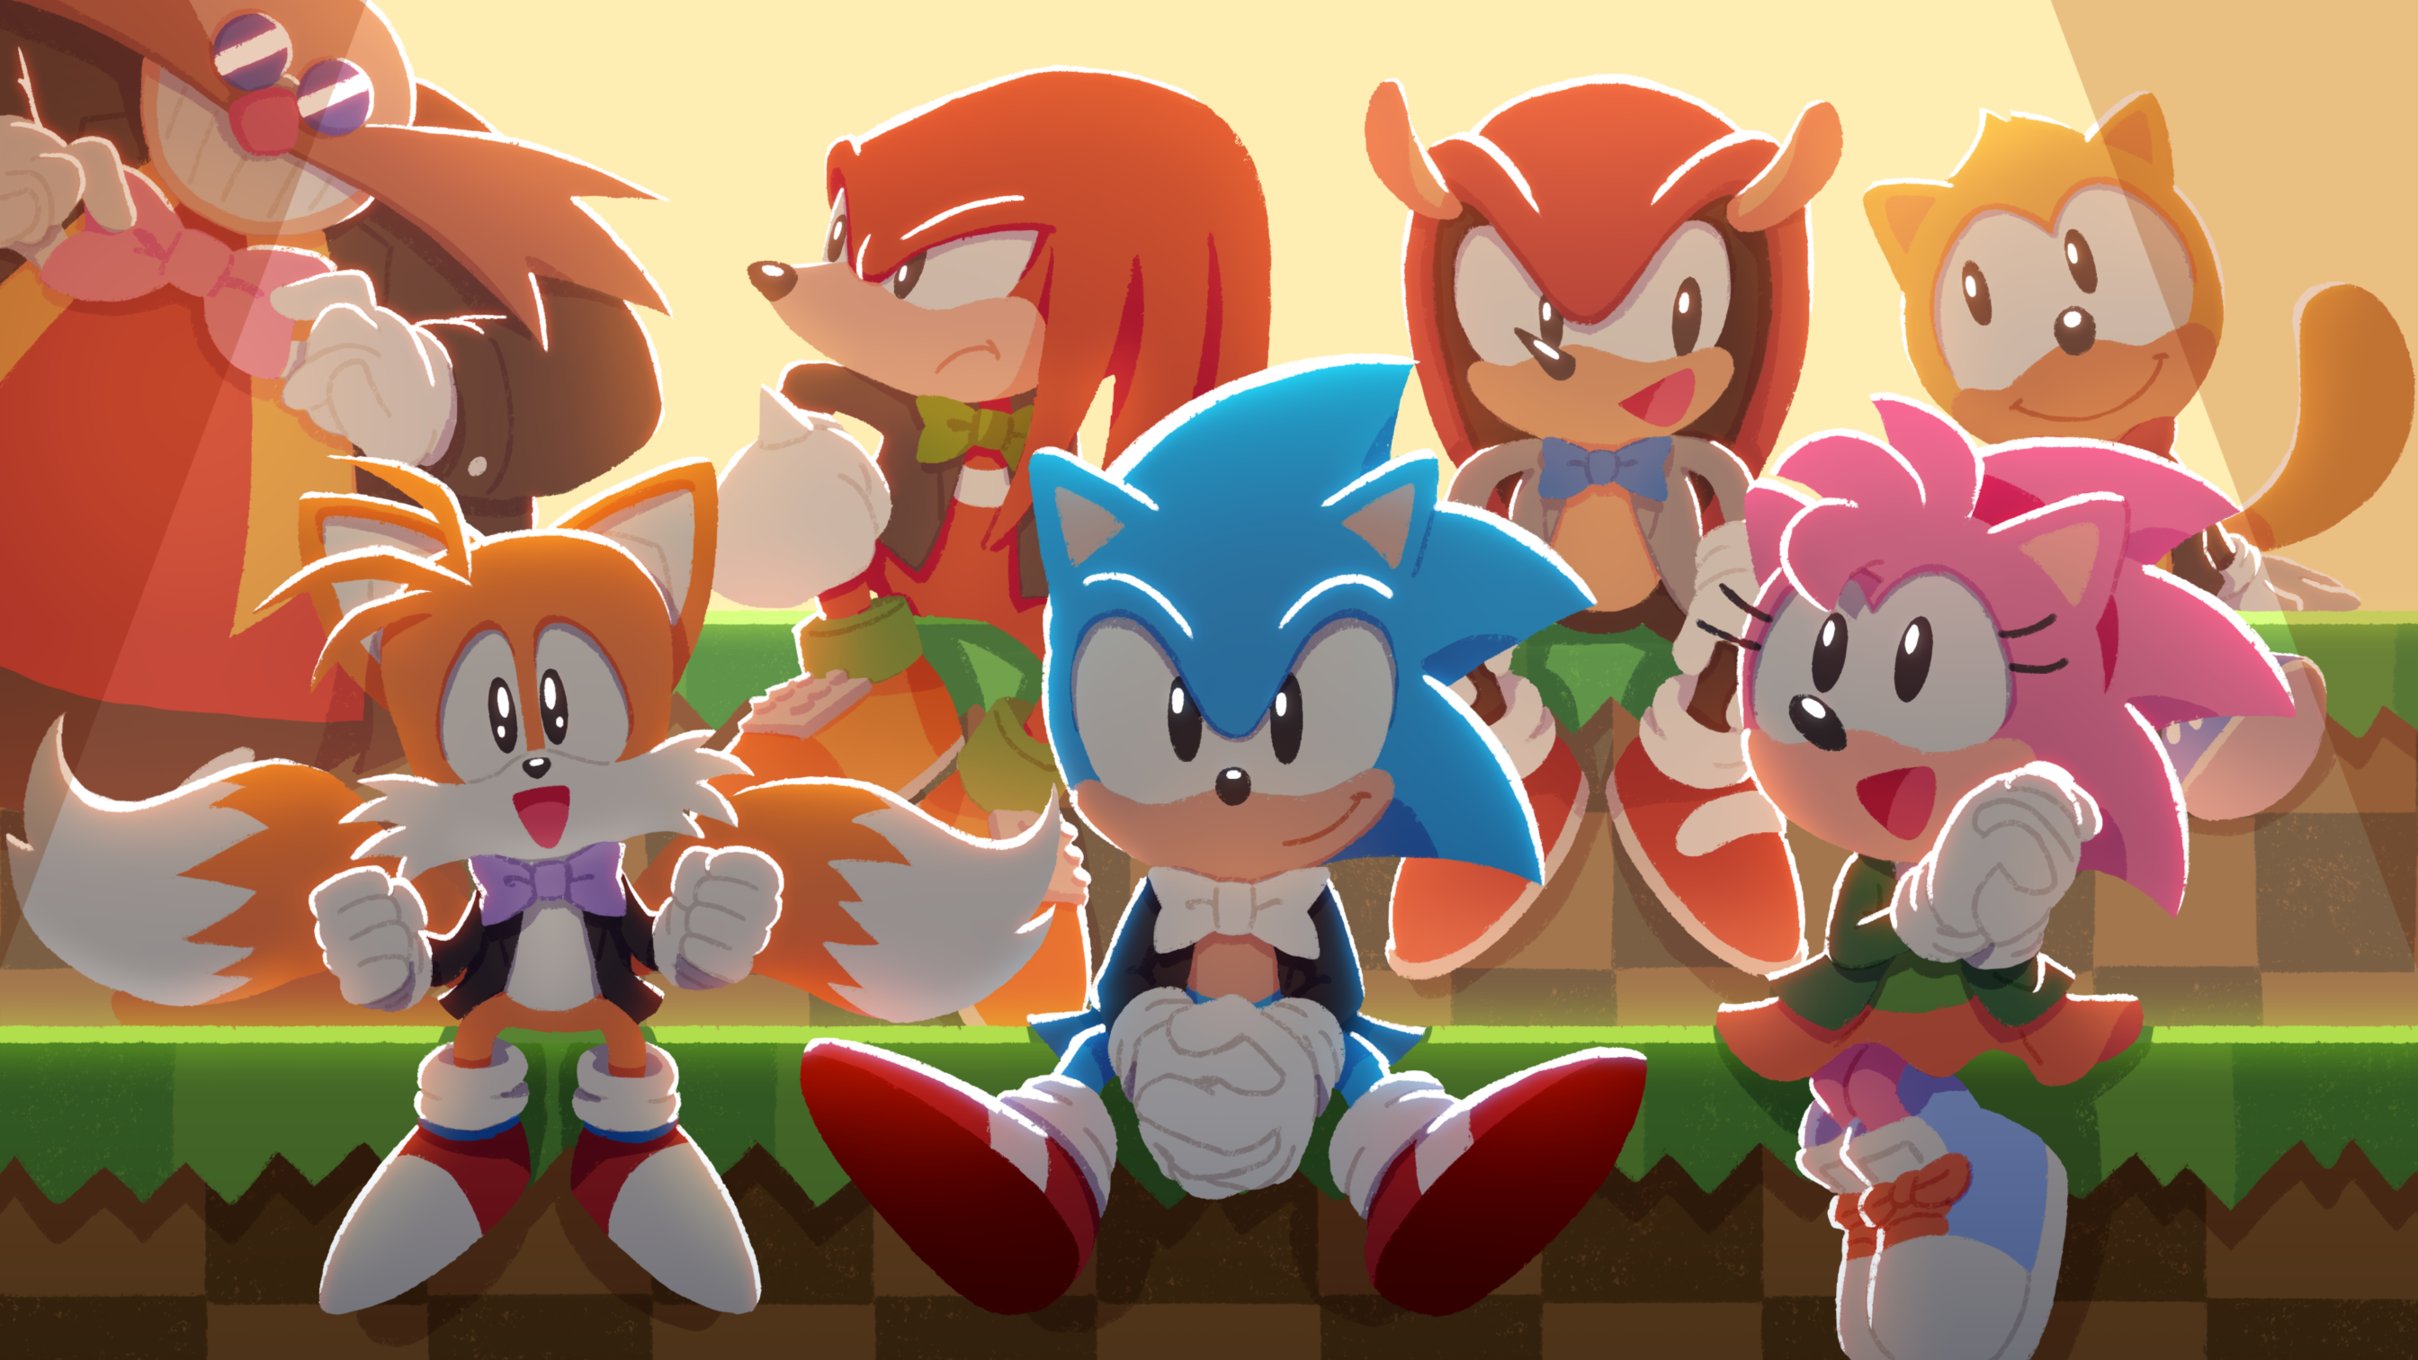 Classic Tails - Desktop Wallpapers, Phone Wallpaper, PFP, Gifs, and More!